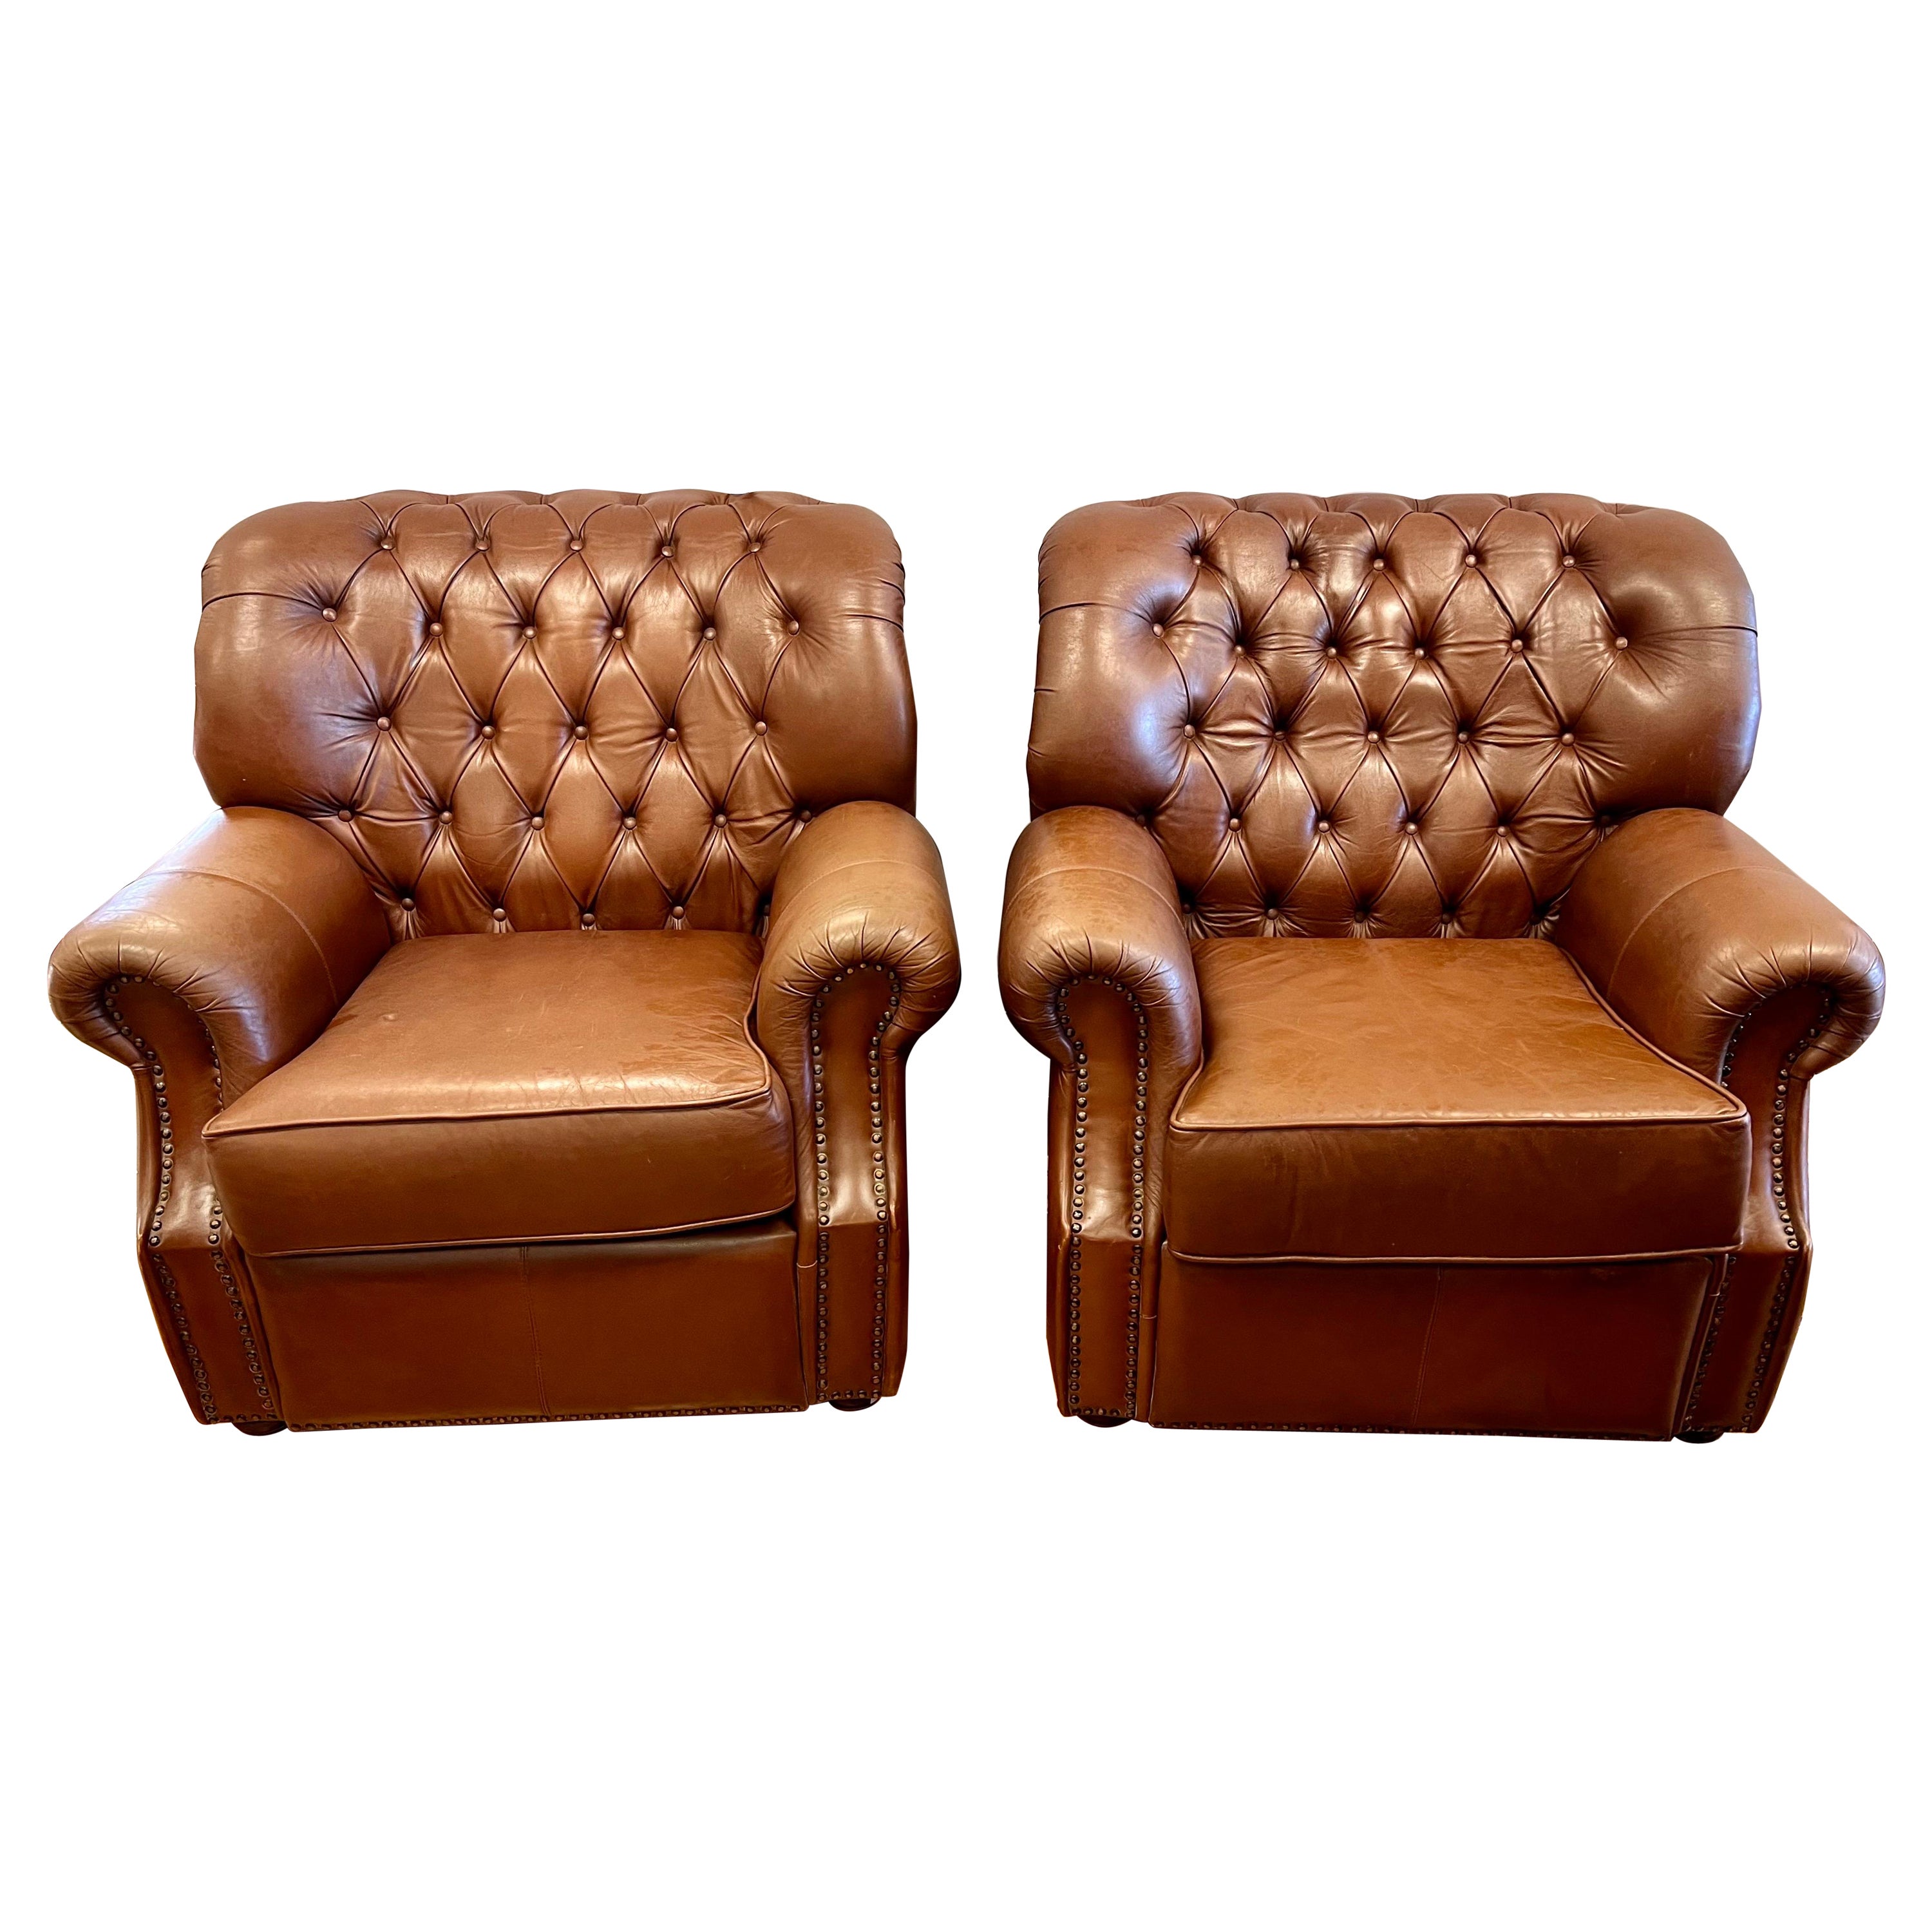 Pair of Brown Leather Tufted Chesterfield Nailhead Cigar Club Chairs